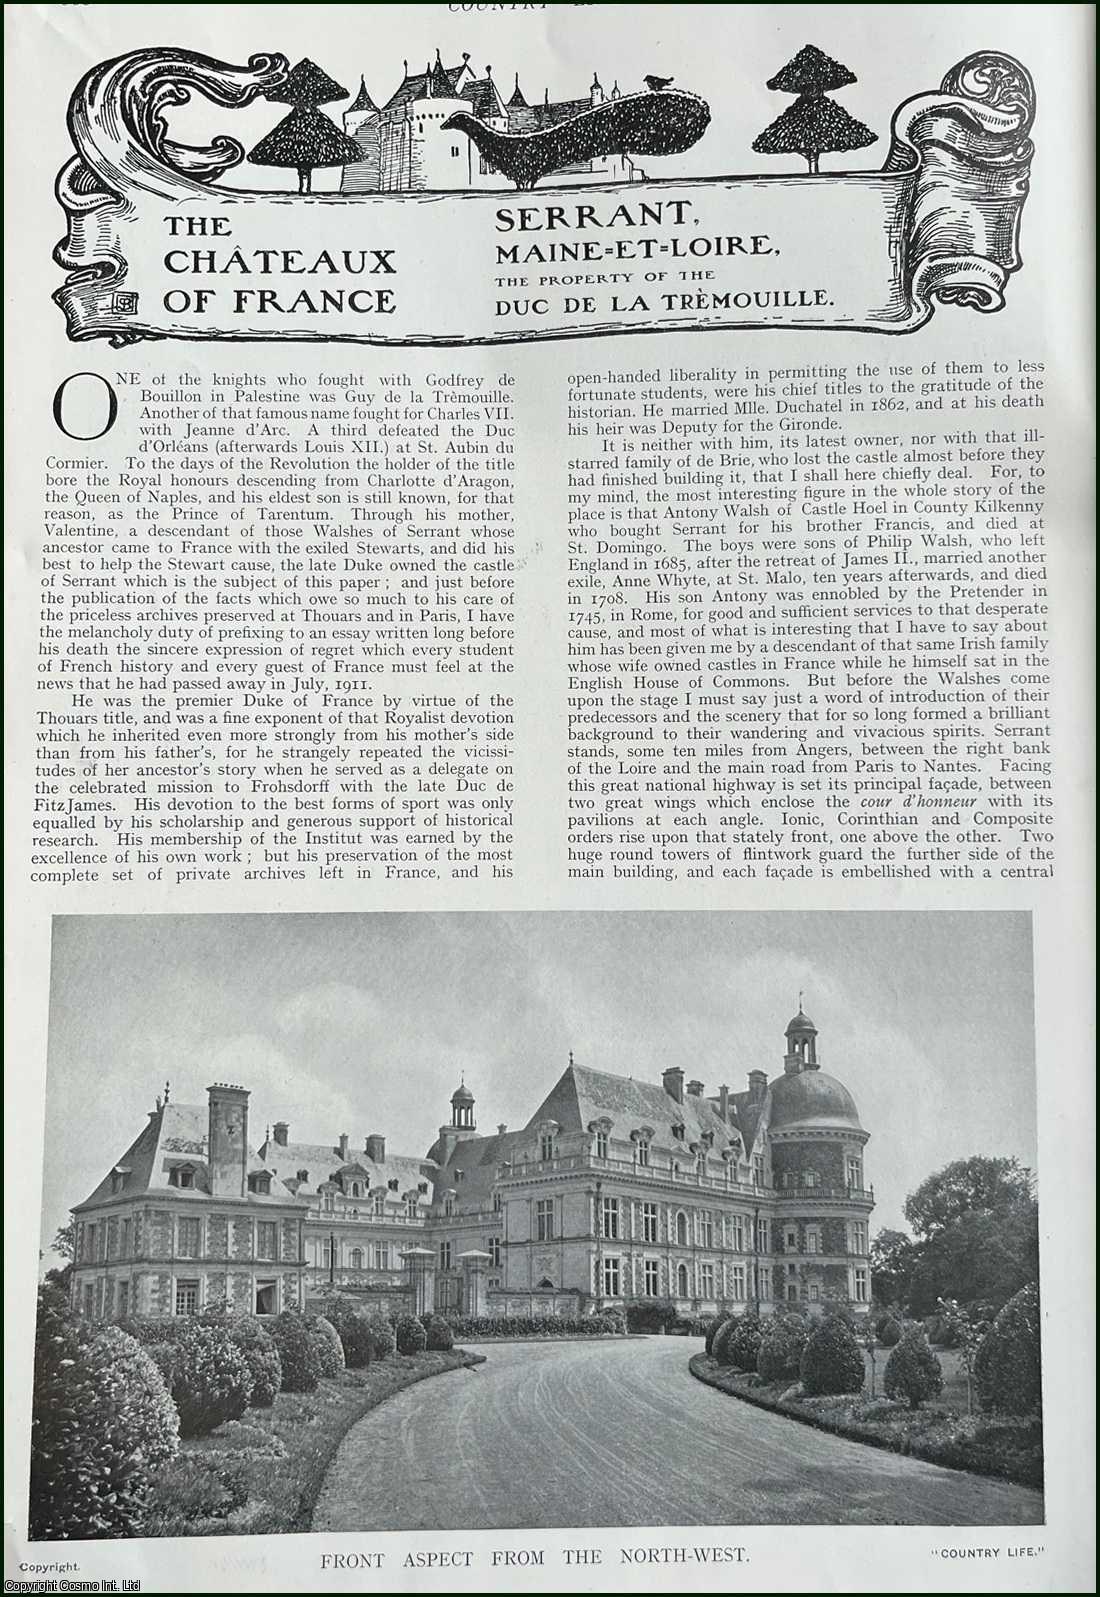 Country Life Magazine - Serrant, Maine-Et-Loire. Several pictures and accompanying text, removed from an original issue of Country Life Magazine, 1911.